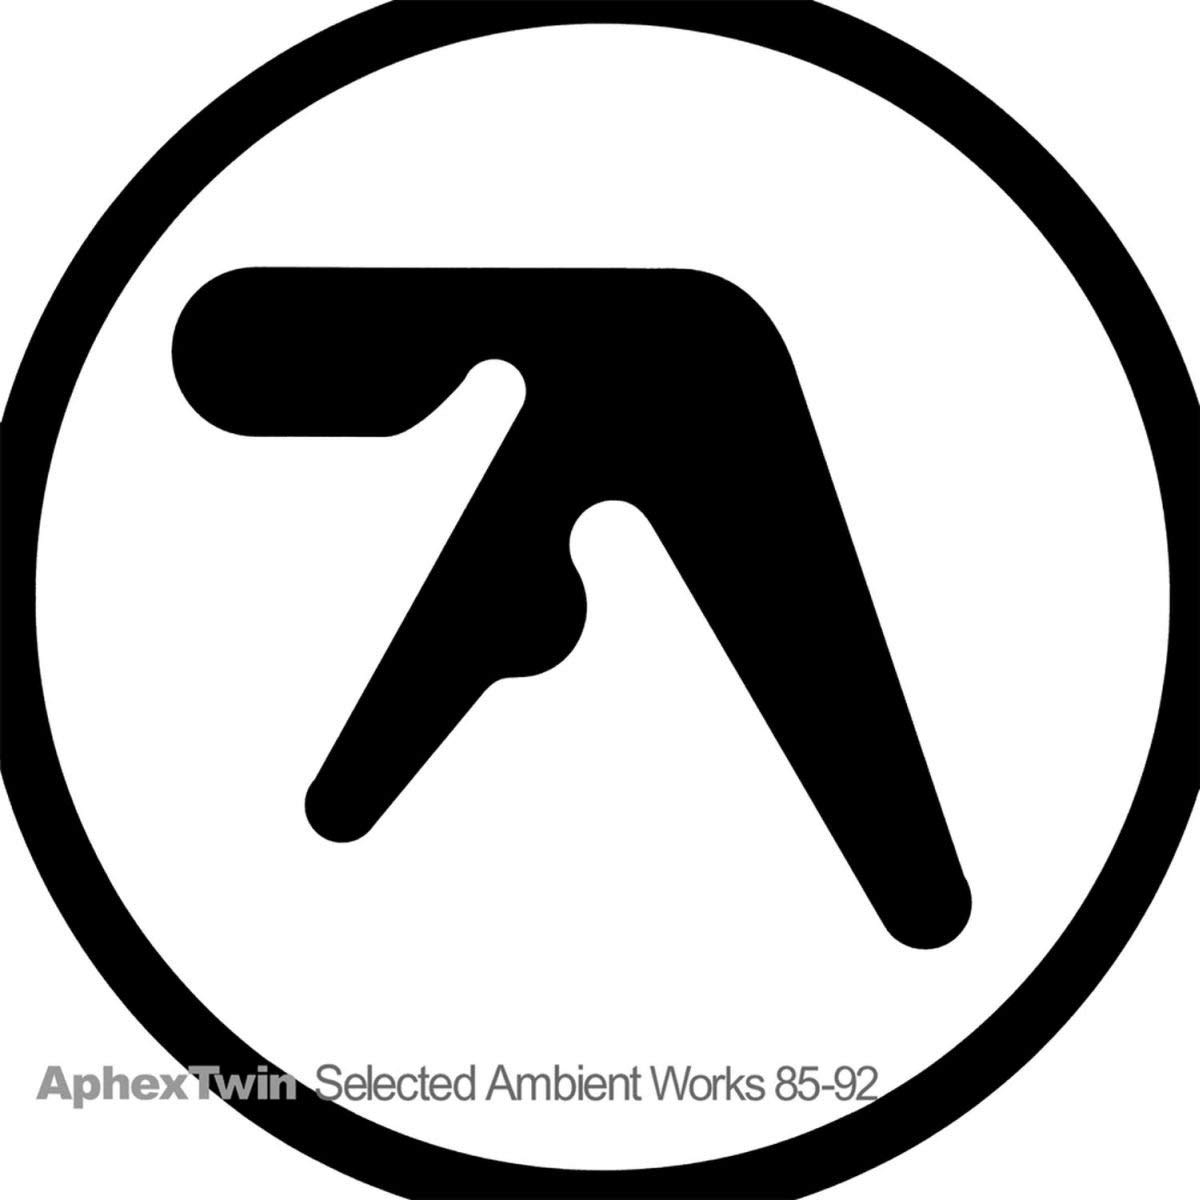 Aphex Twin "Selected Ambient Works (85-92)" LP